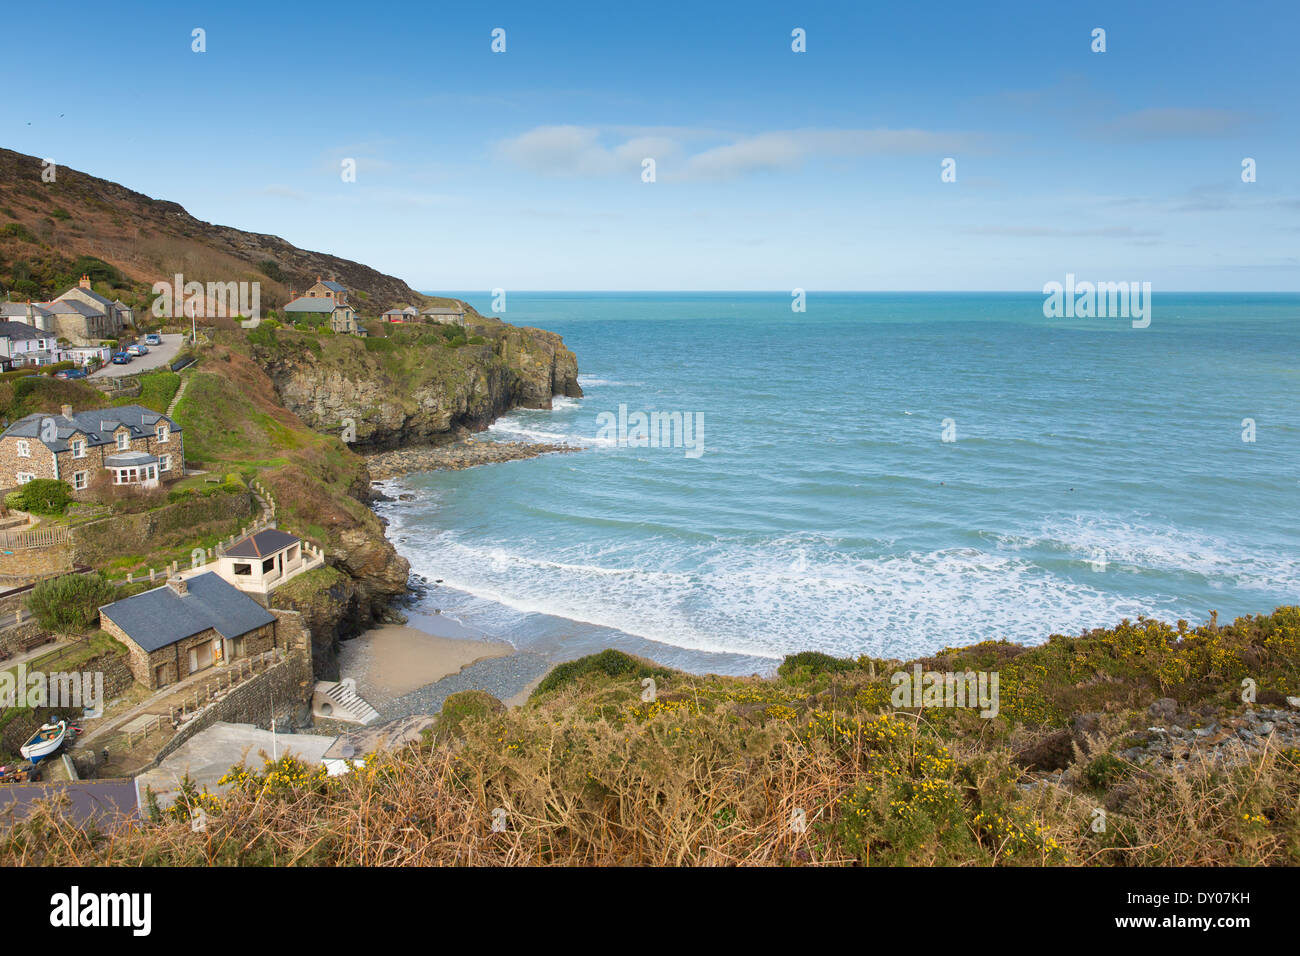 St Agnes Cornwall England United Kingdom between Newquay and St Ives Stock Photo